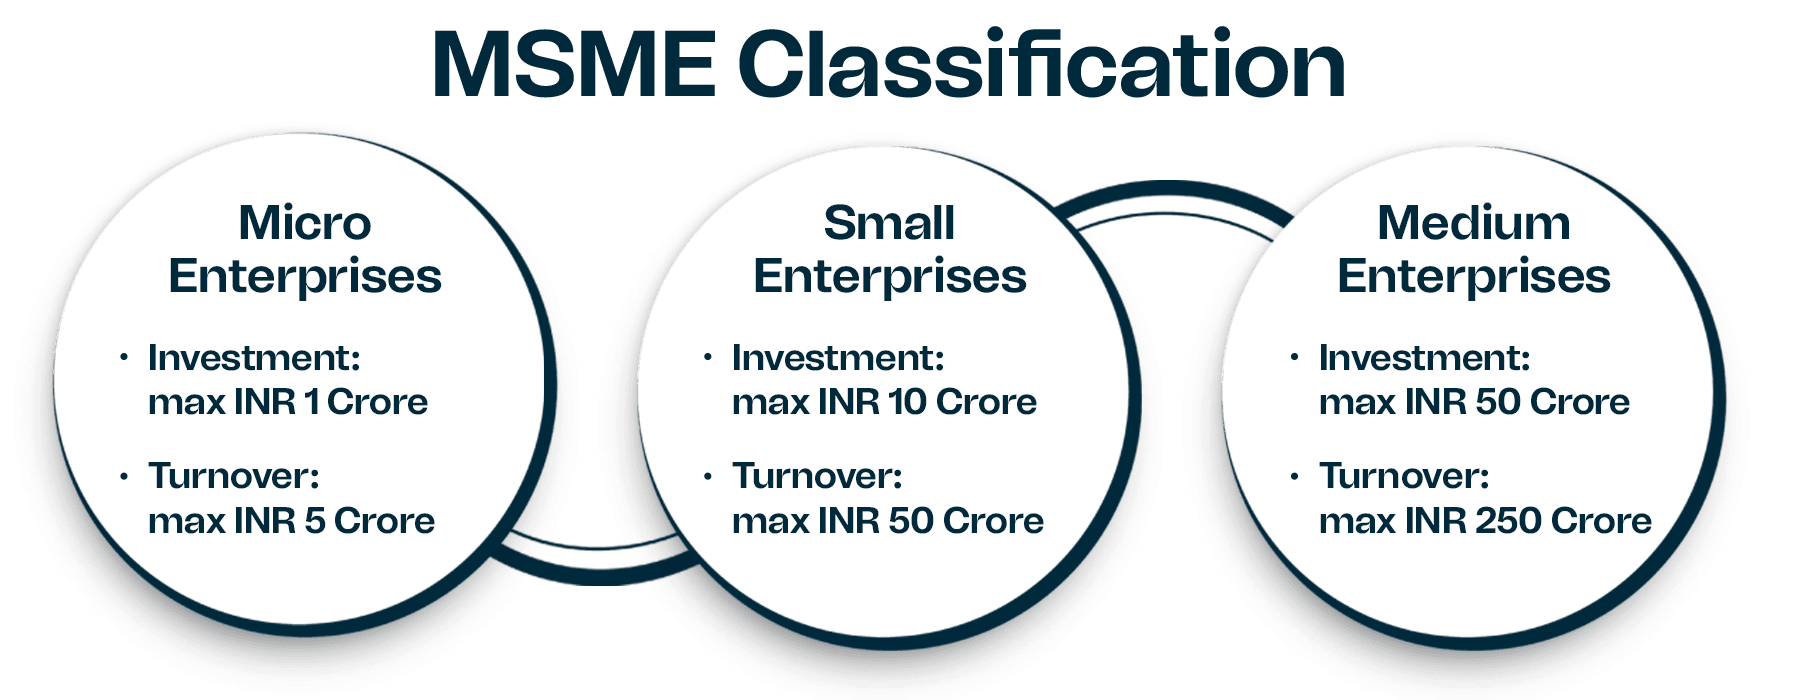 Classification of MSME 